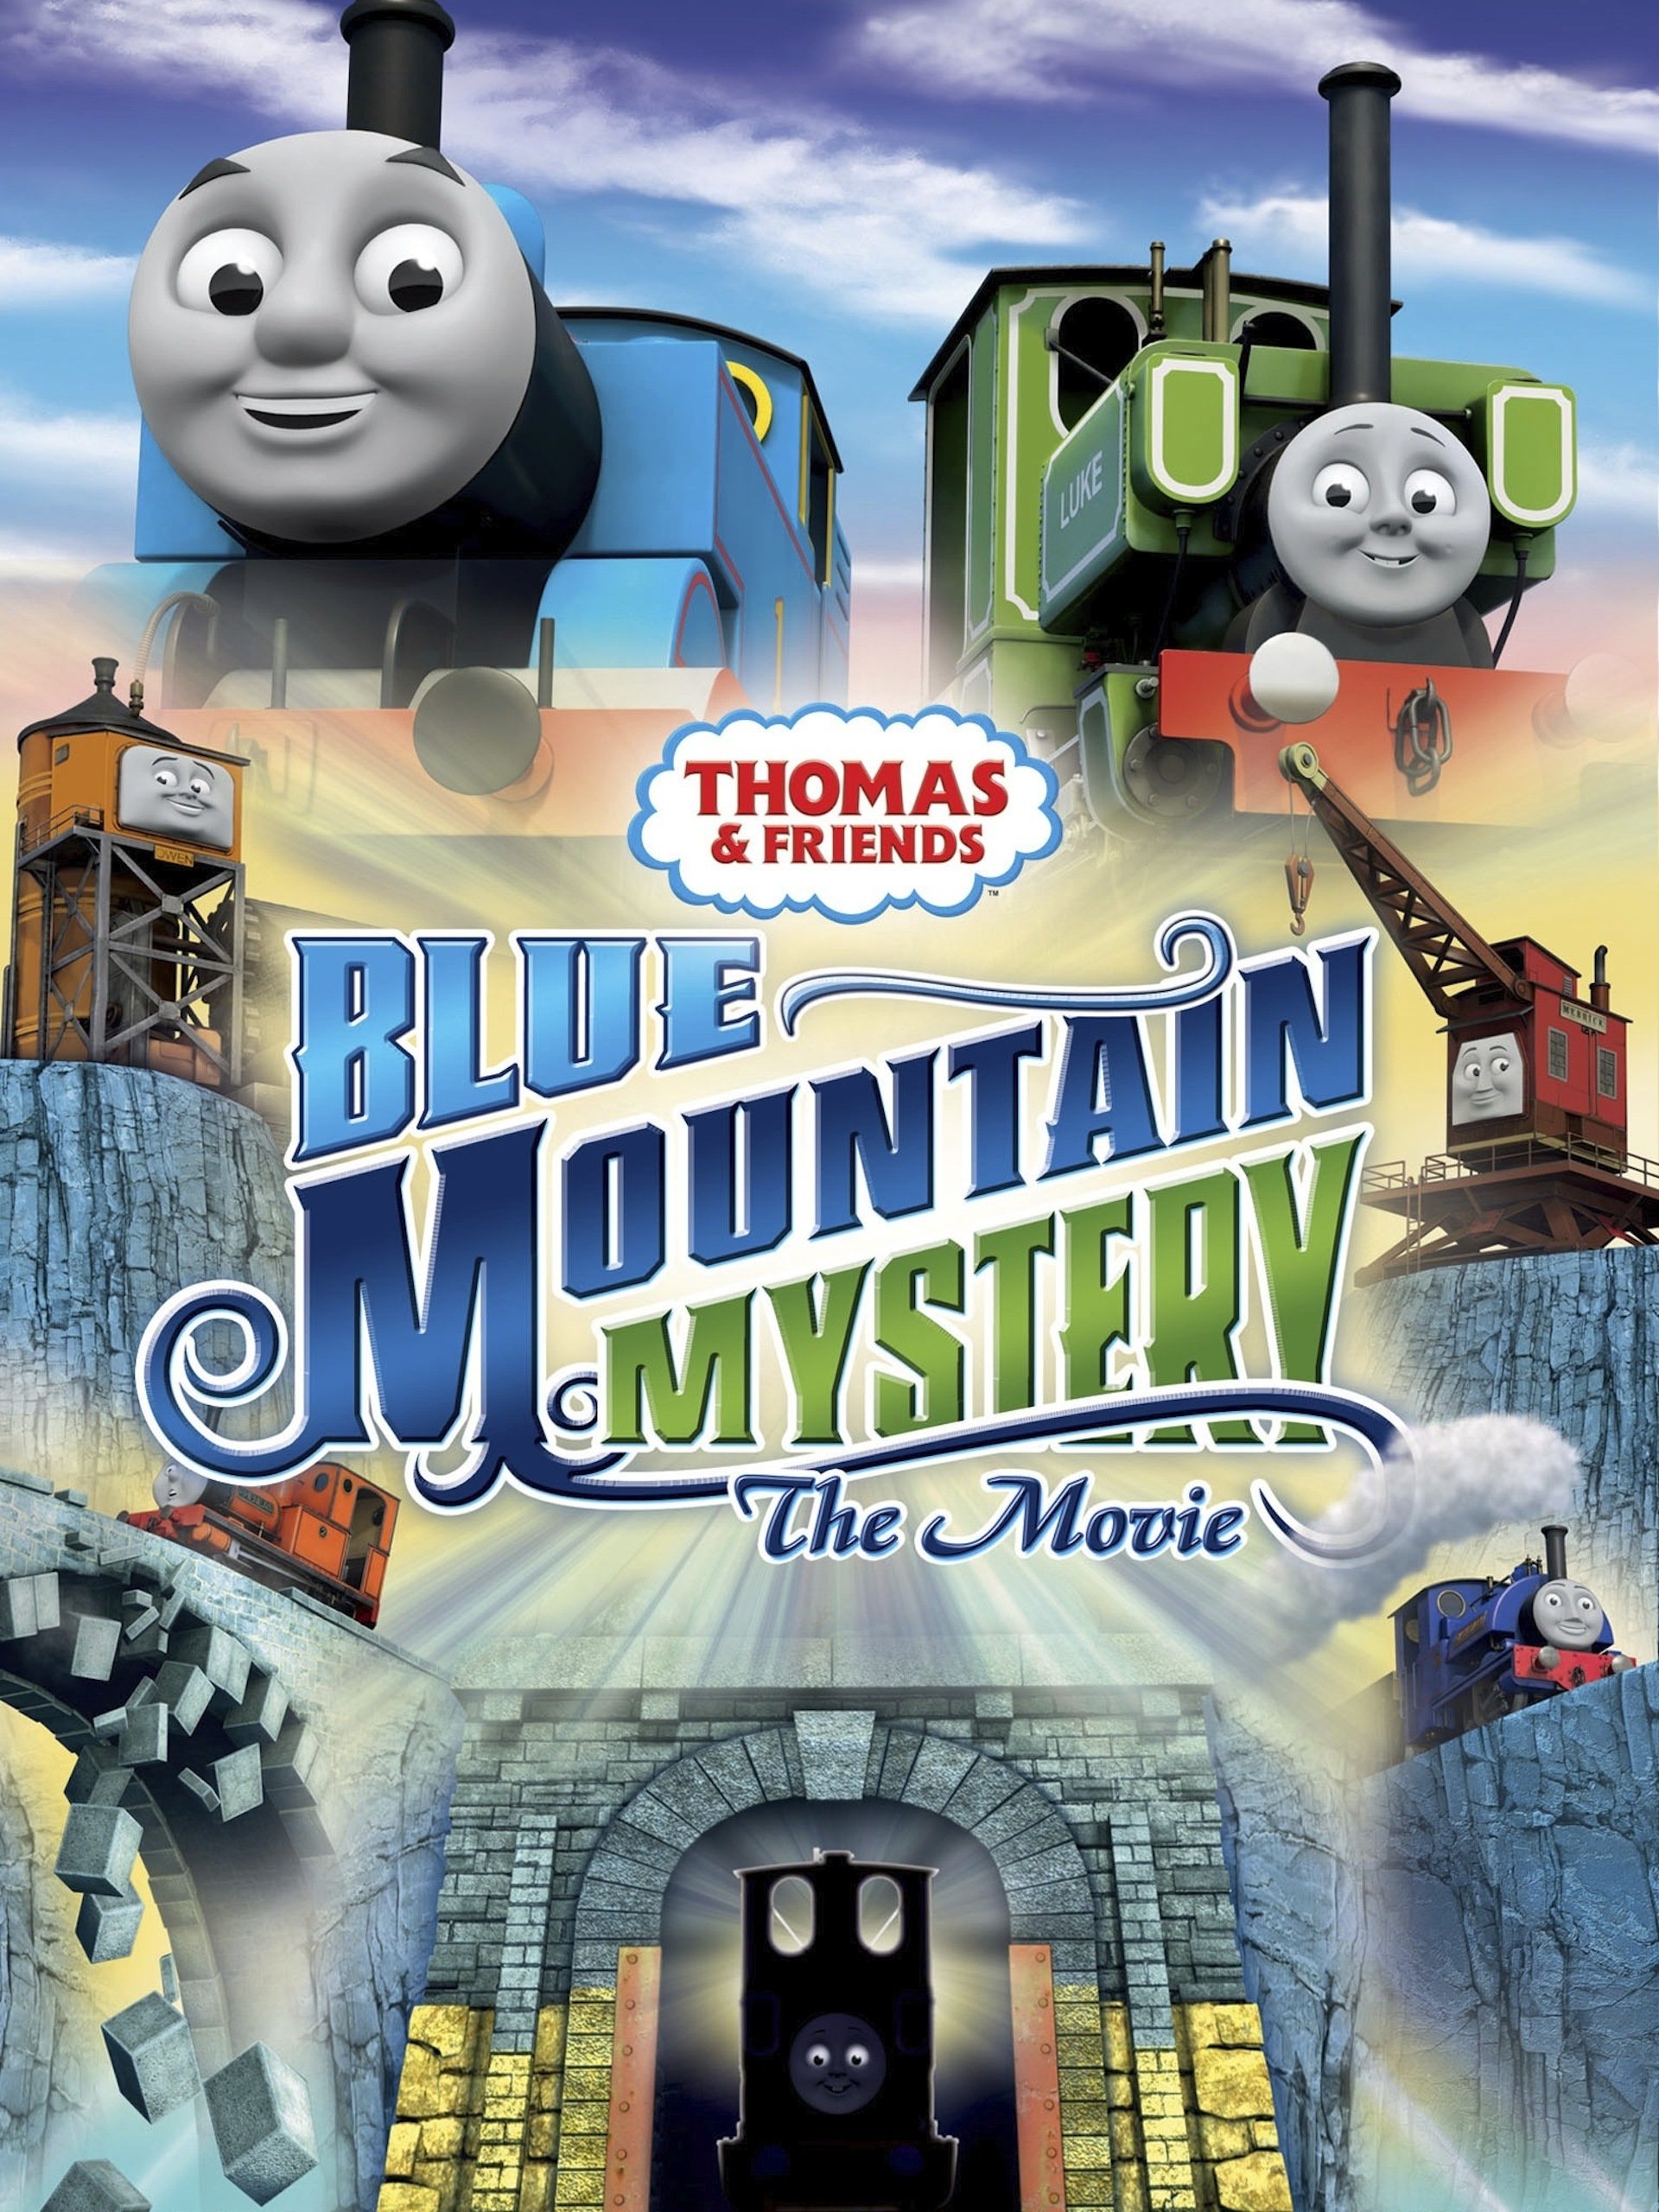 thomas and friends blue mountain quarry